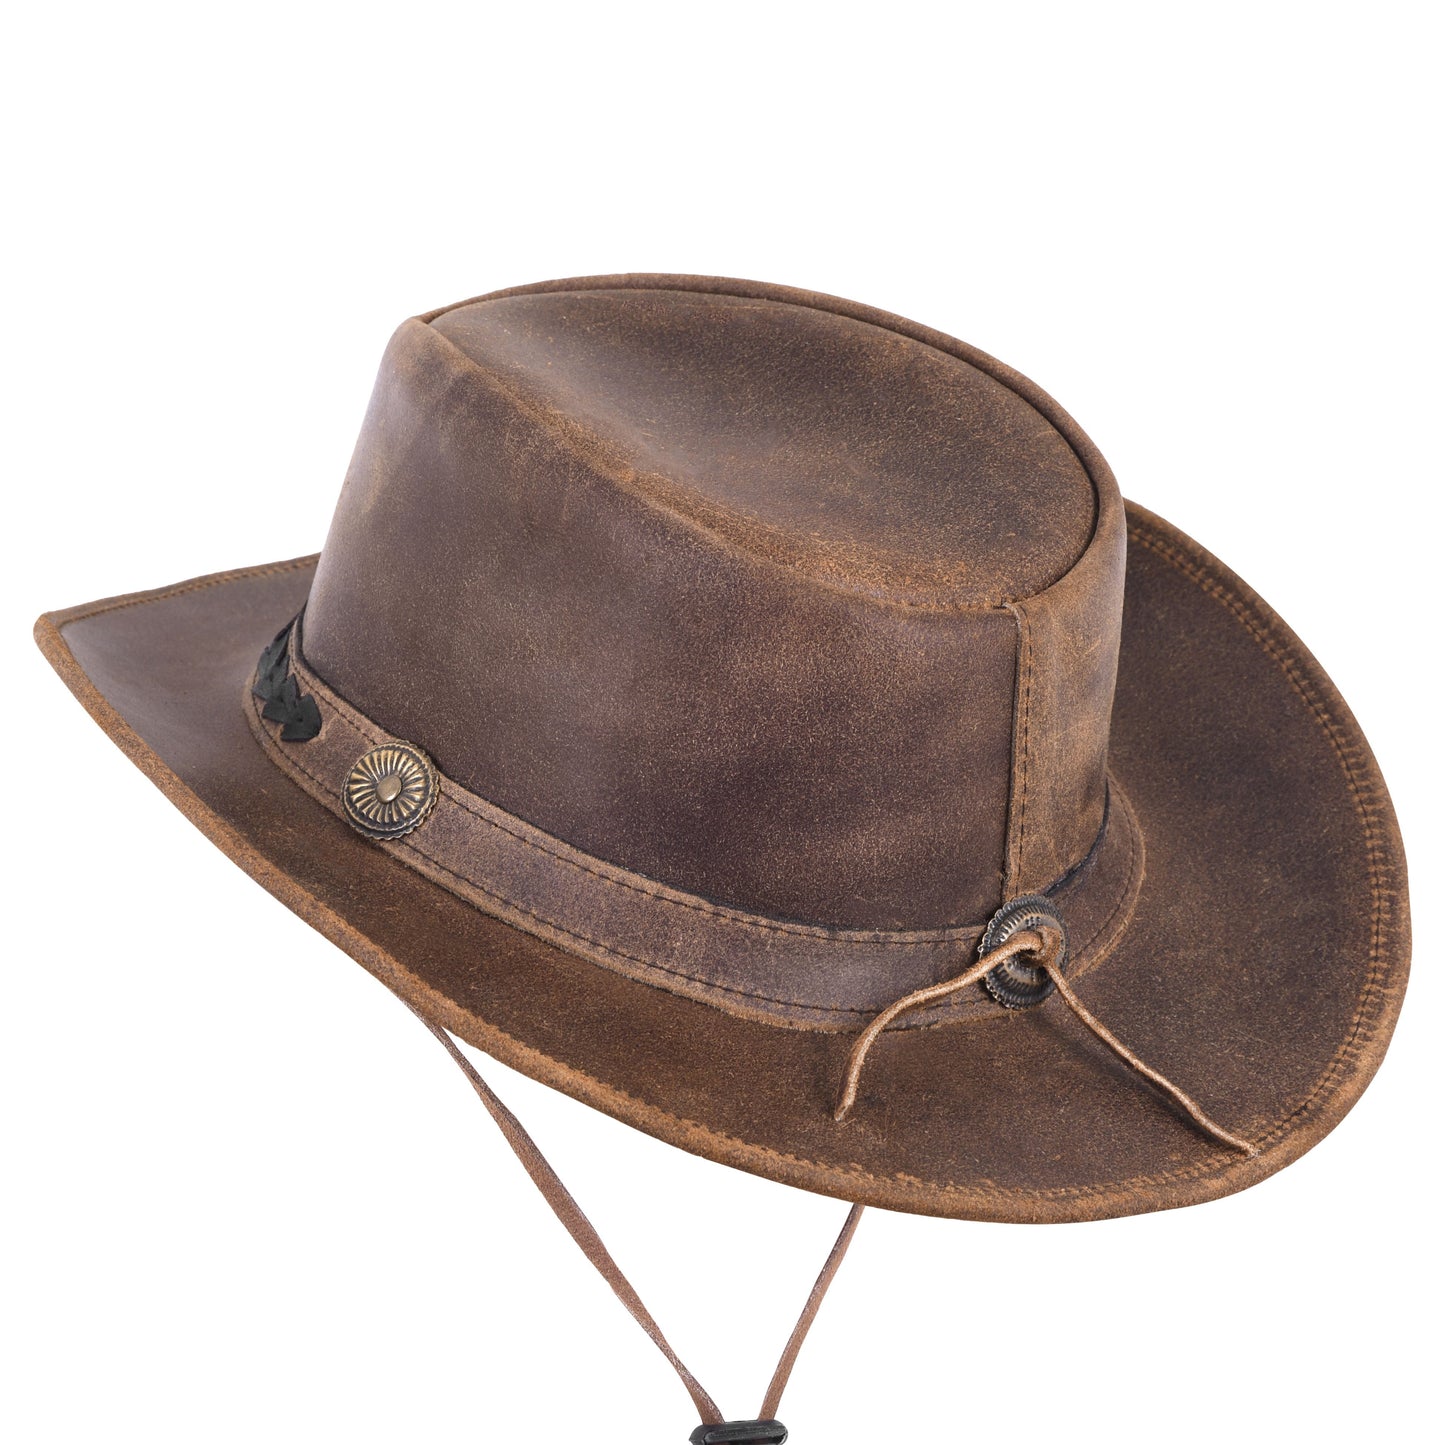 Vintage Leather Cowboy Hat Distressed Style with Braided Hat Band